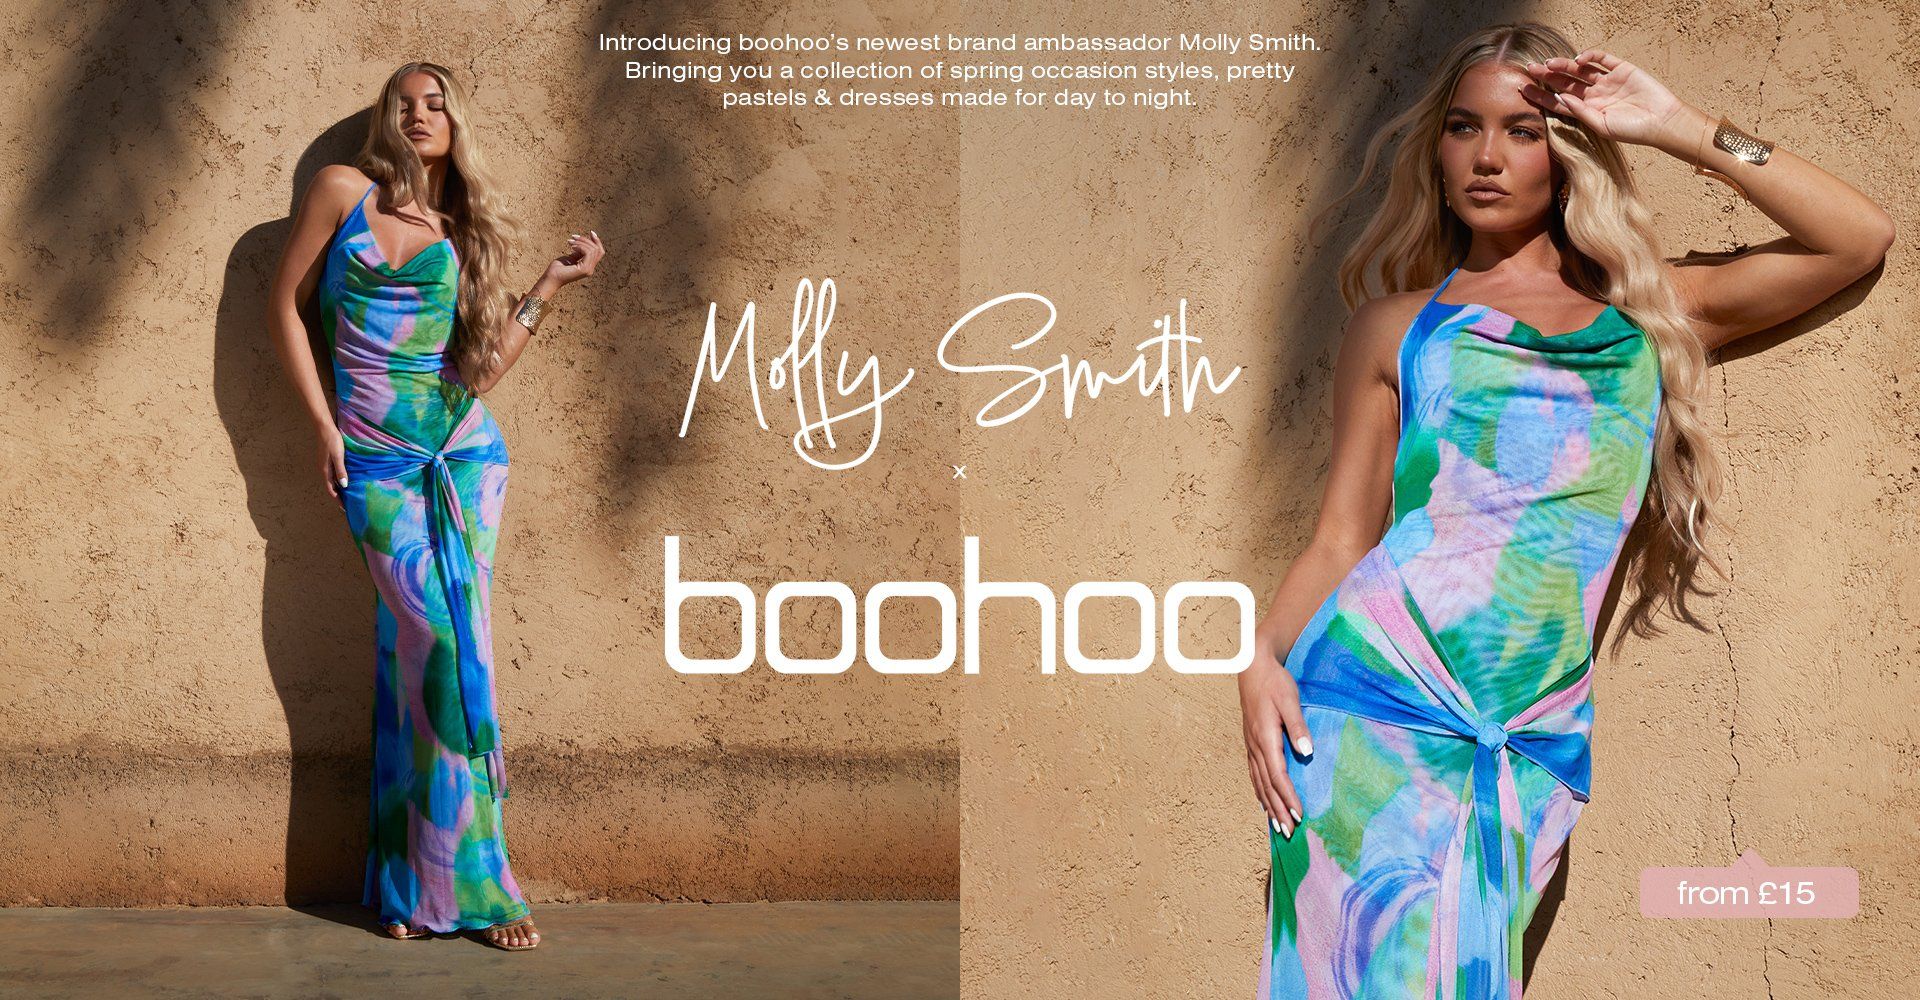 Molly Smith x boohoo Introducing boohoos newest ambassador Molly Smith. Bringing you a collection of spring occasion styles, pretty pastels & dresses made for day to night.
                                      From £15